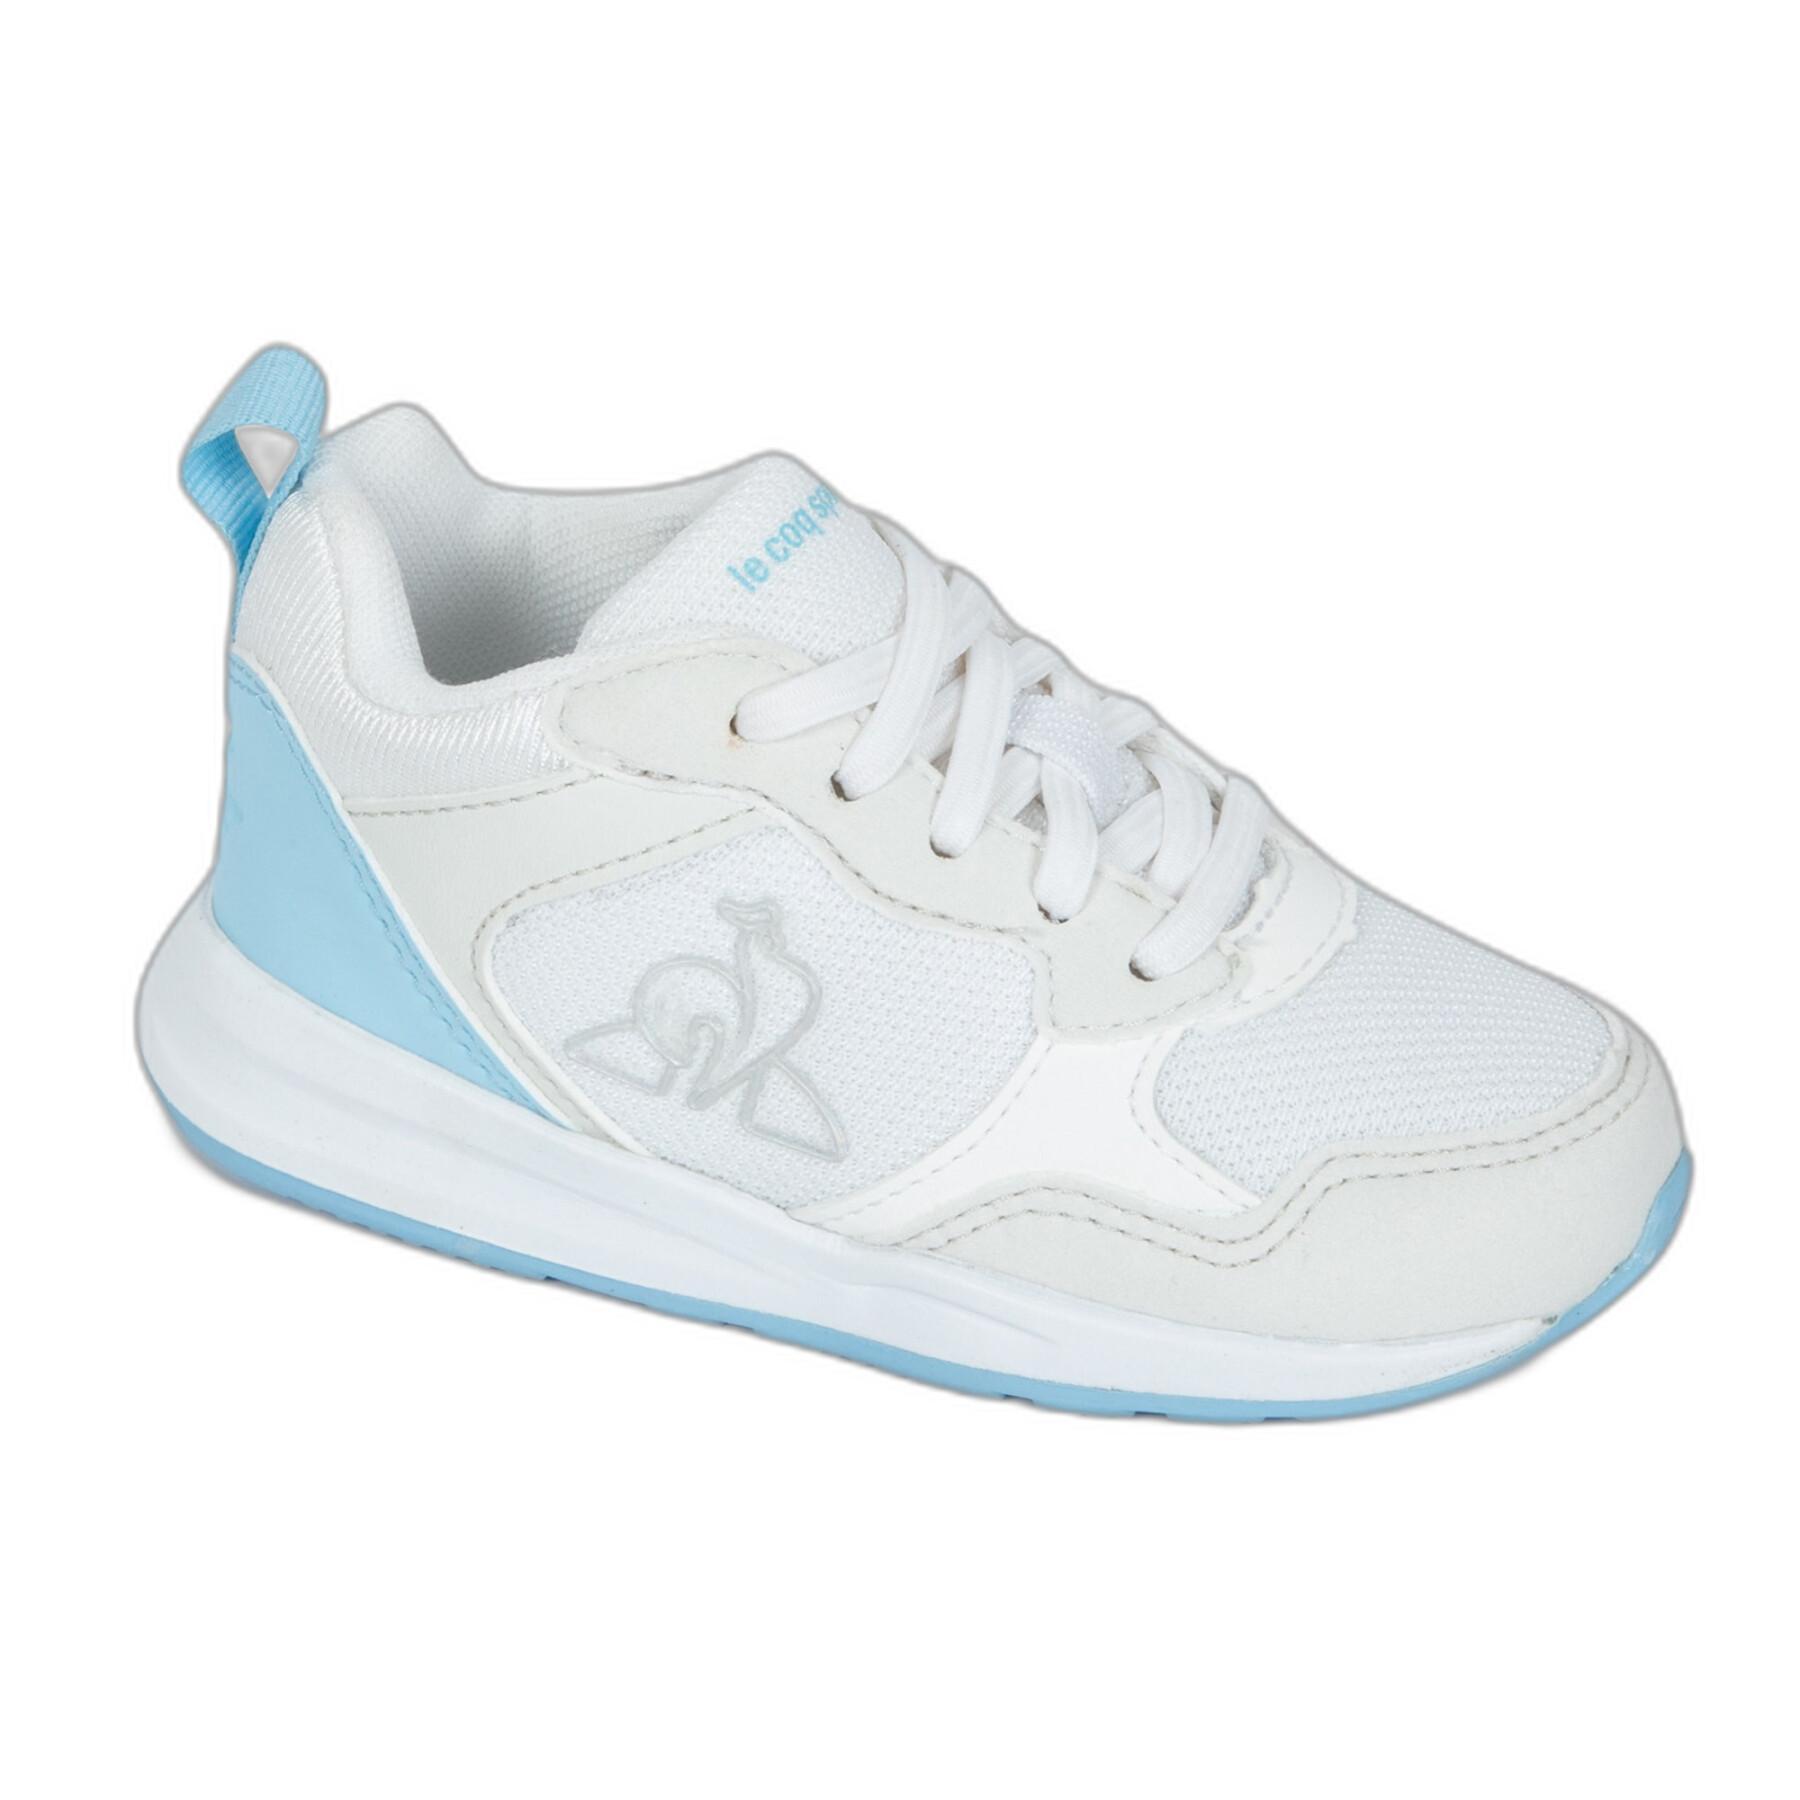 Kindertrainers Le Coq Sportif Lcs R500 Inf Iridescent